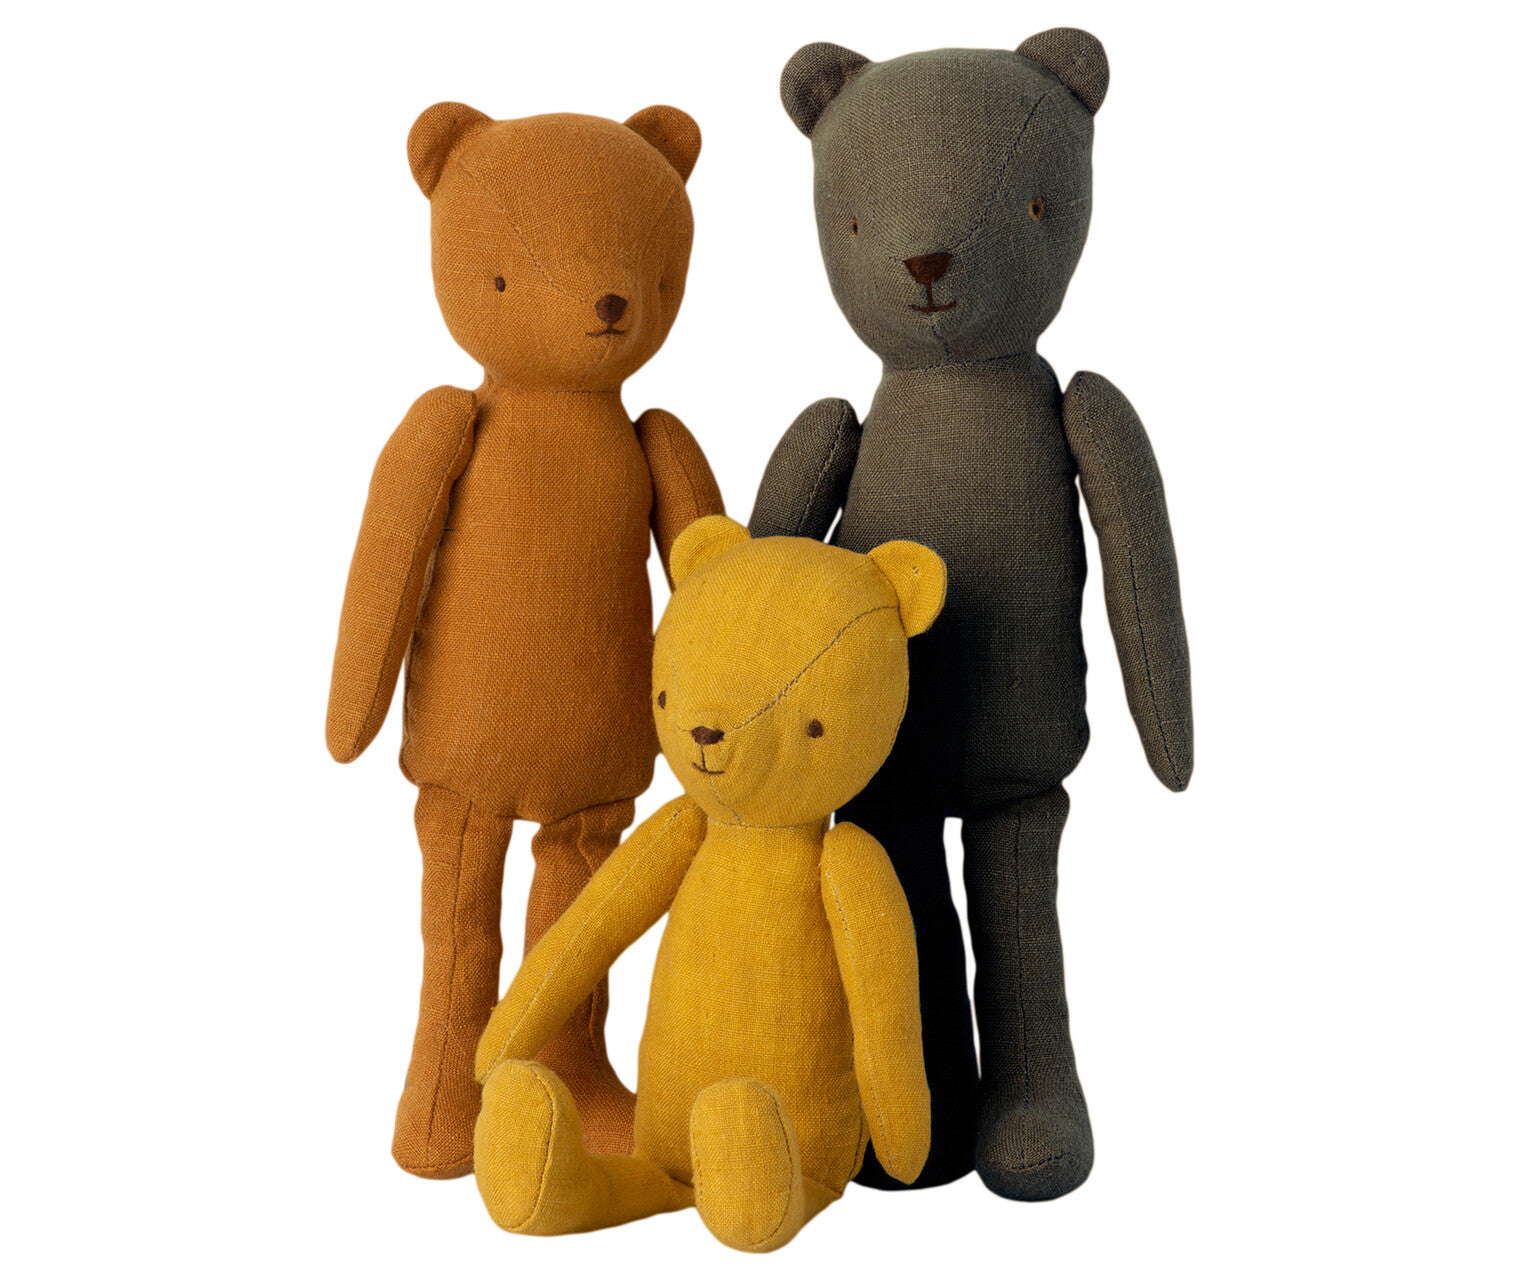 Teddy Junior Plush Toy: Perfect for Kids' Imaginative Play & Cuddle Sessions